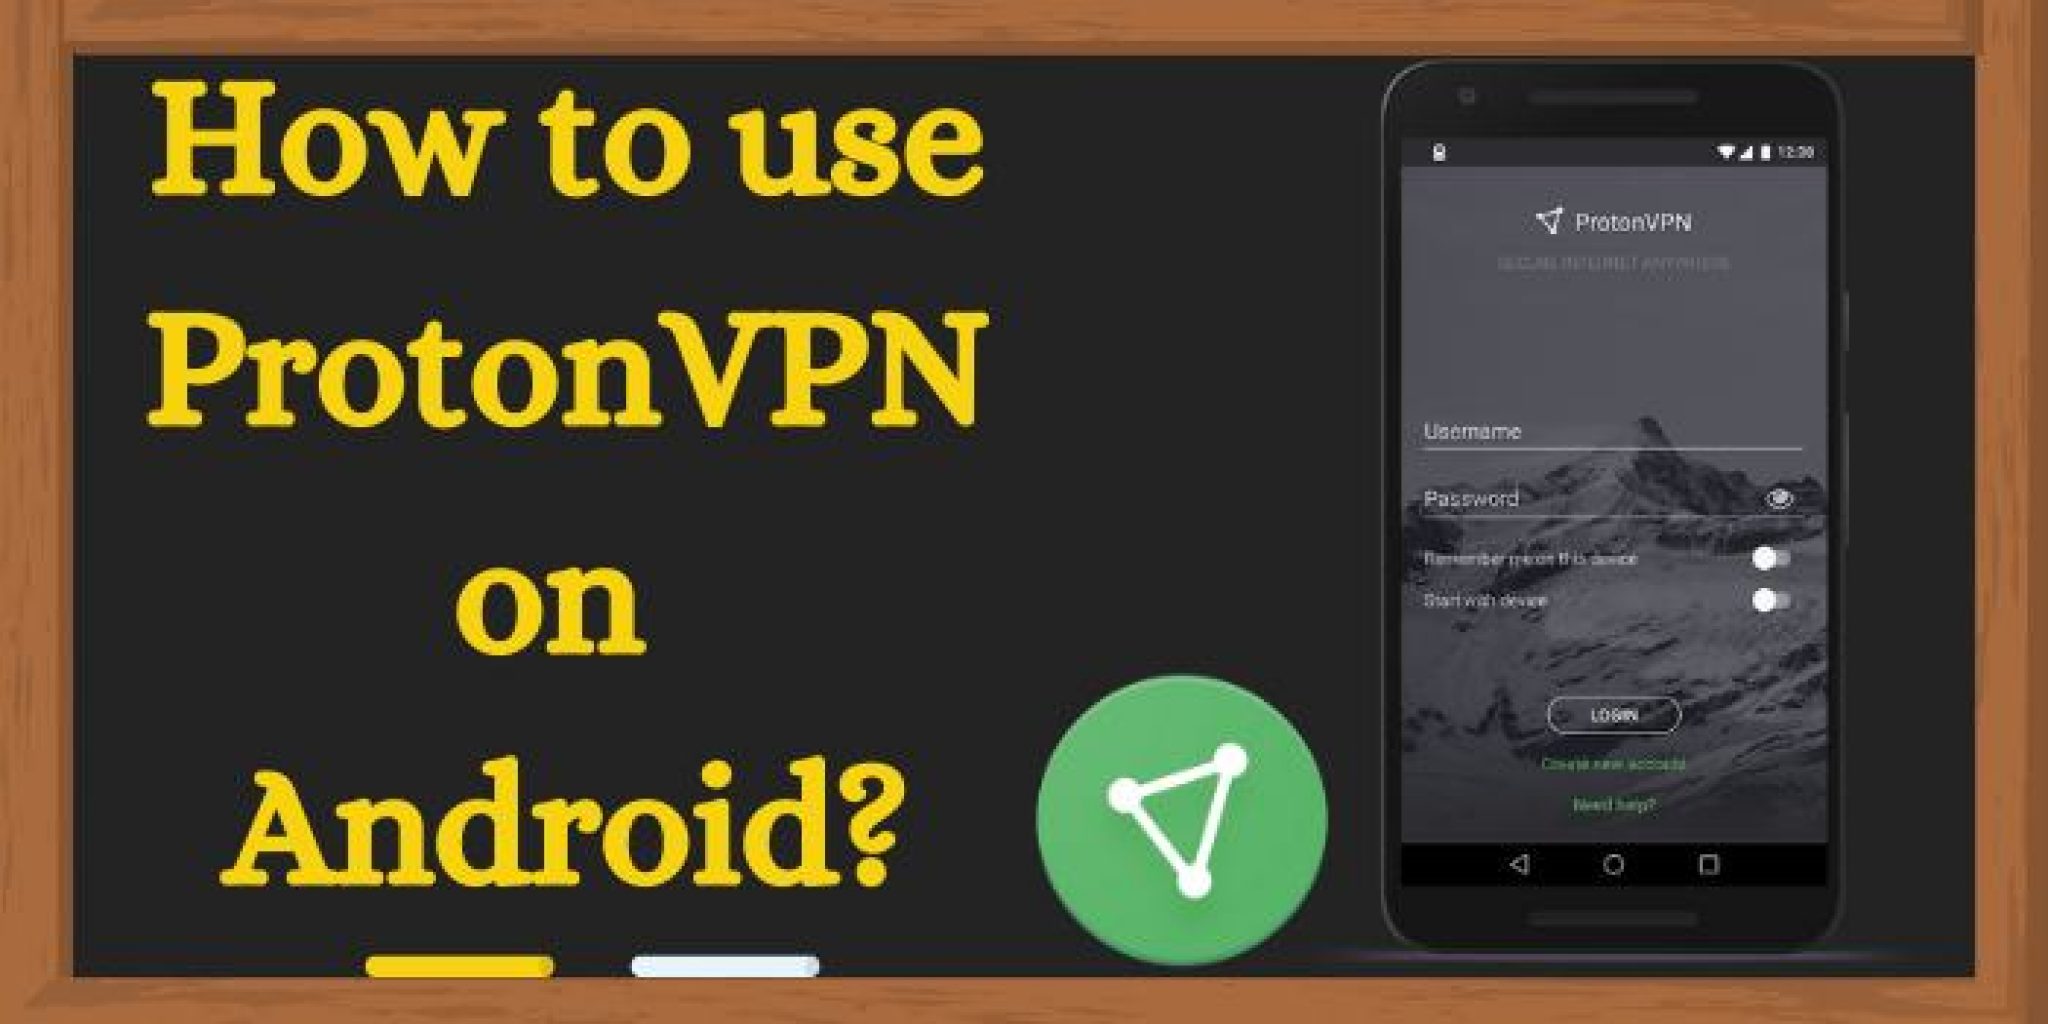 Follow the Steps To Know How to Use ProtonVPN on Android?